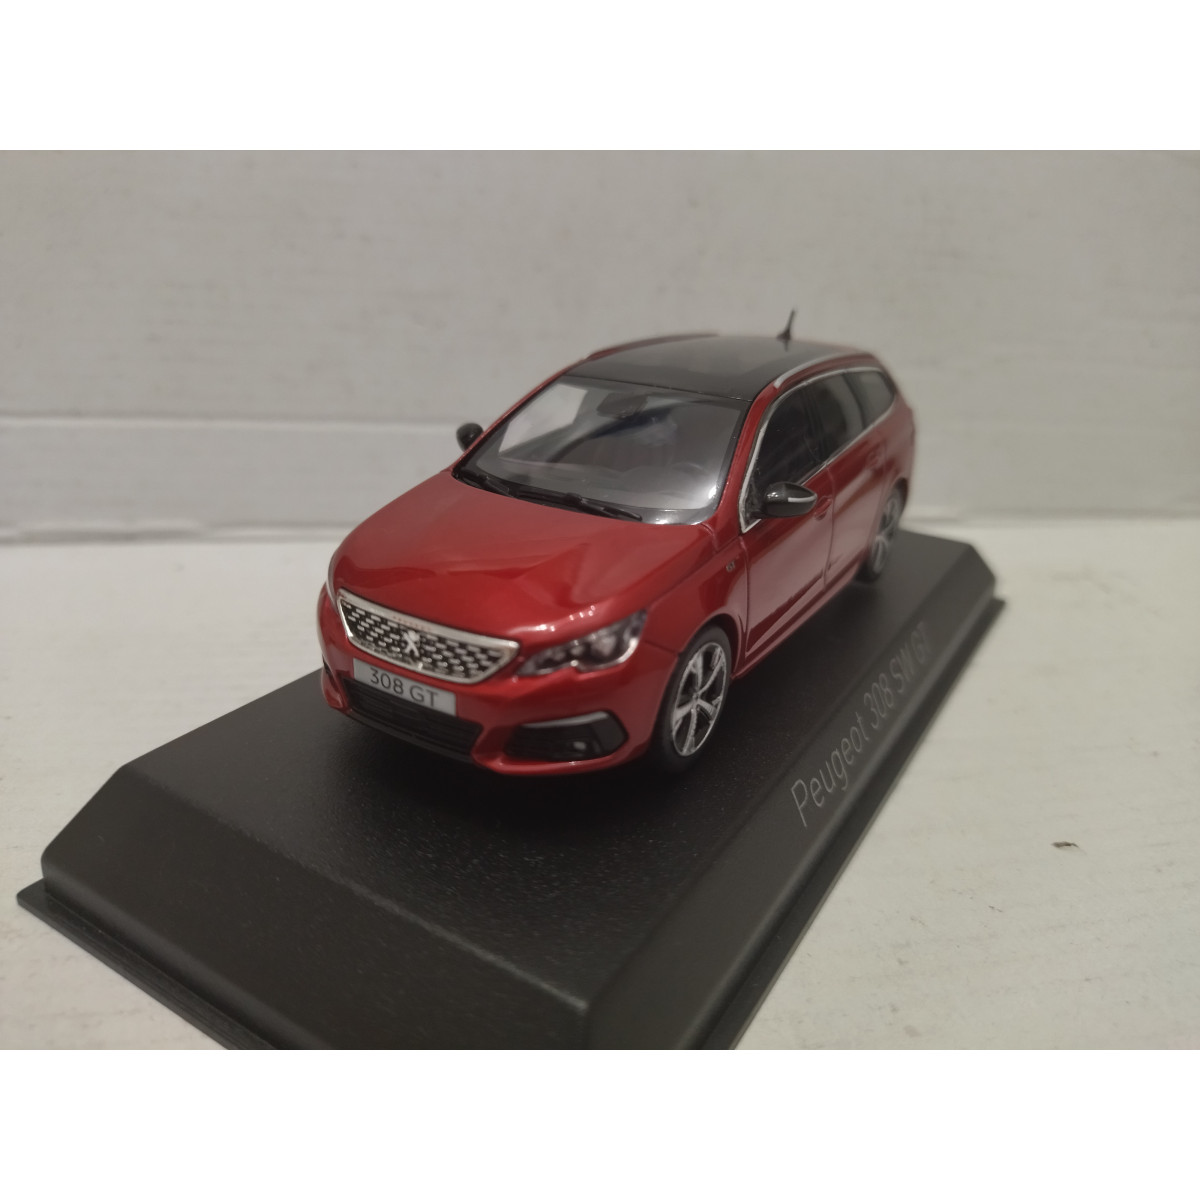 Peugeot 308 GT 2017 Ultimate Red 1:43